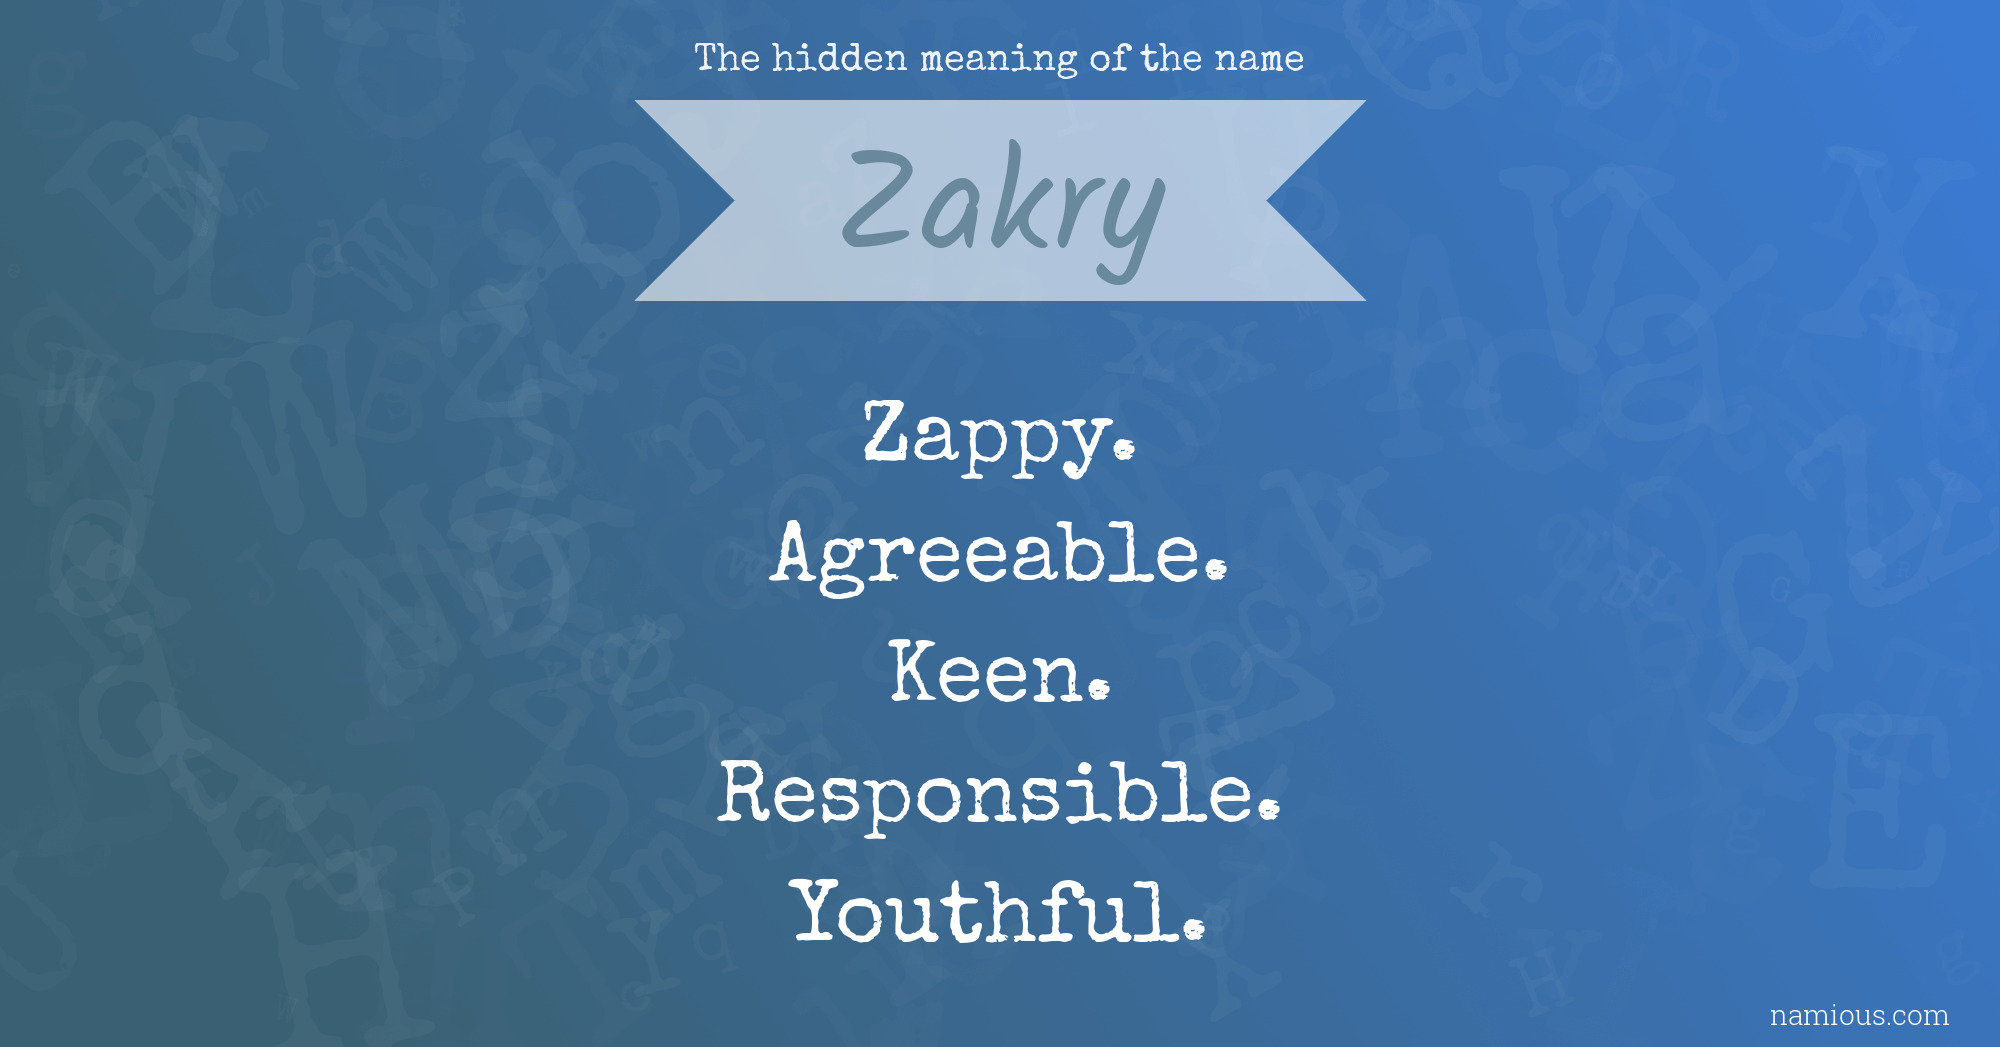 The hidden meaning of the name Zakry